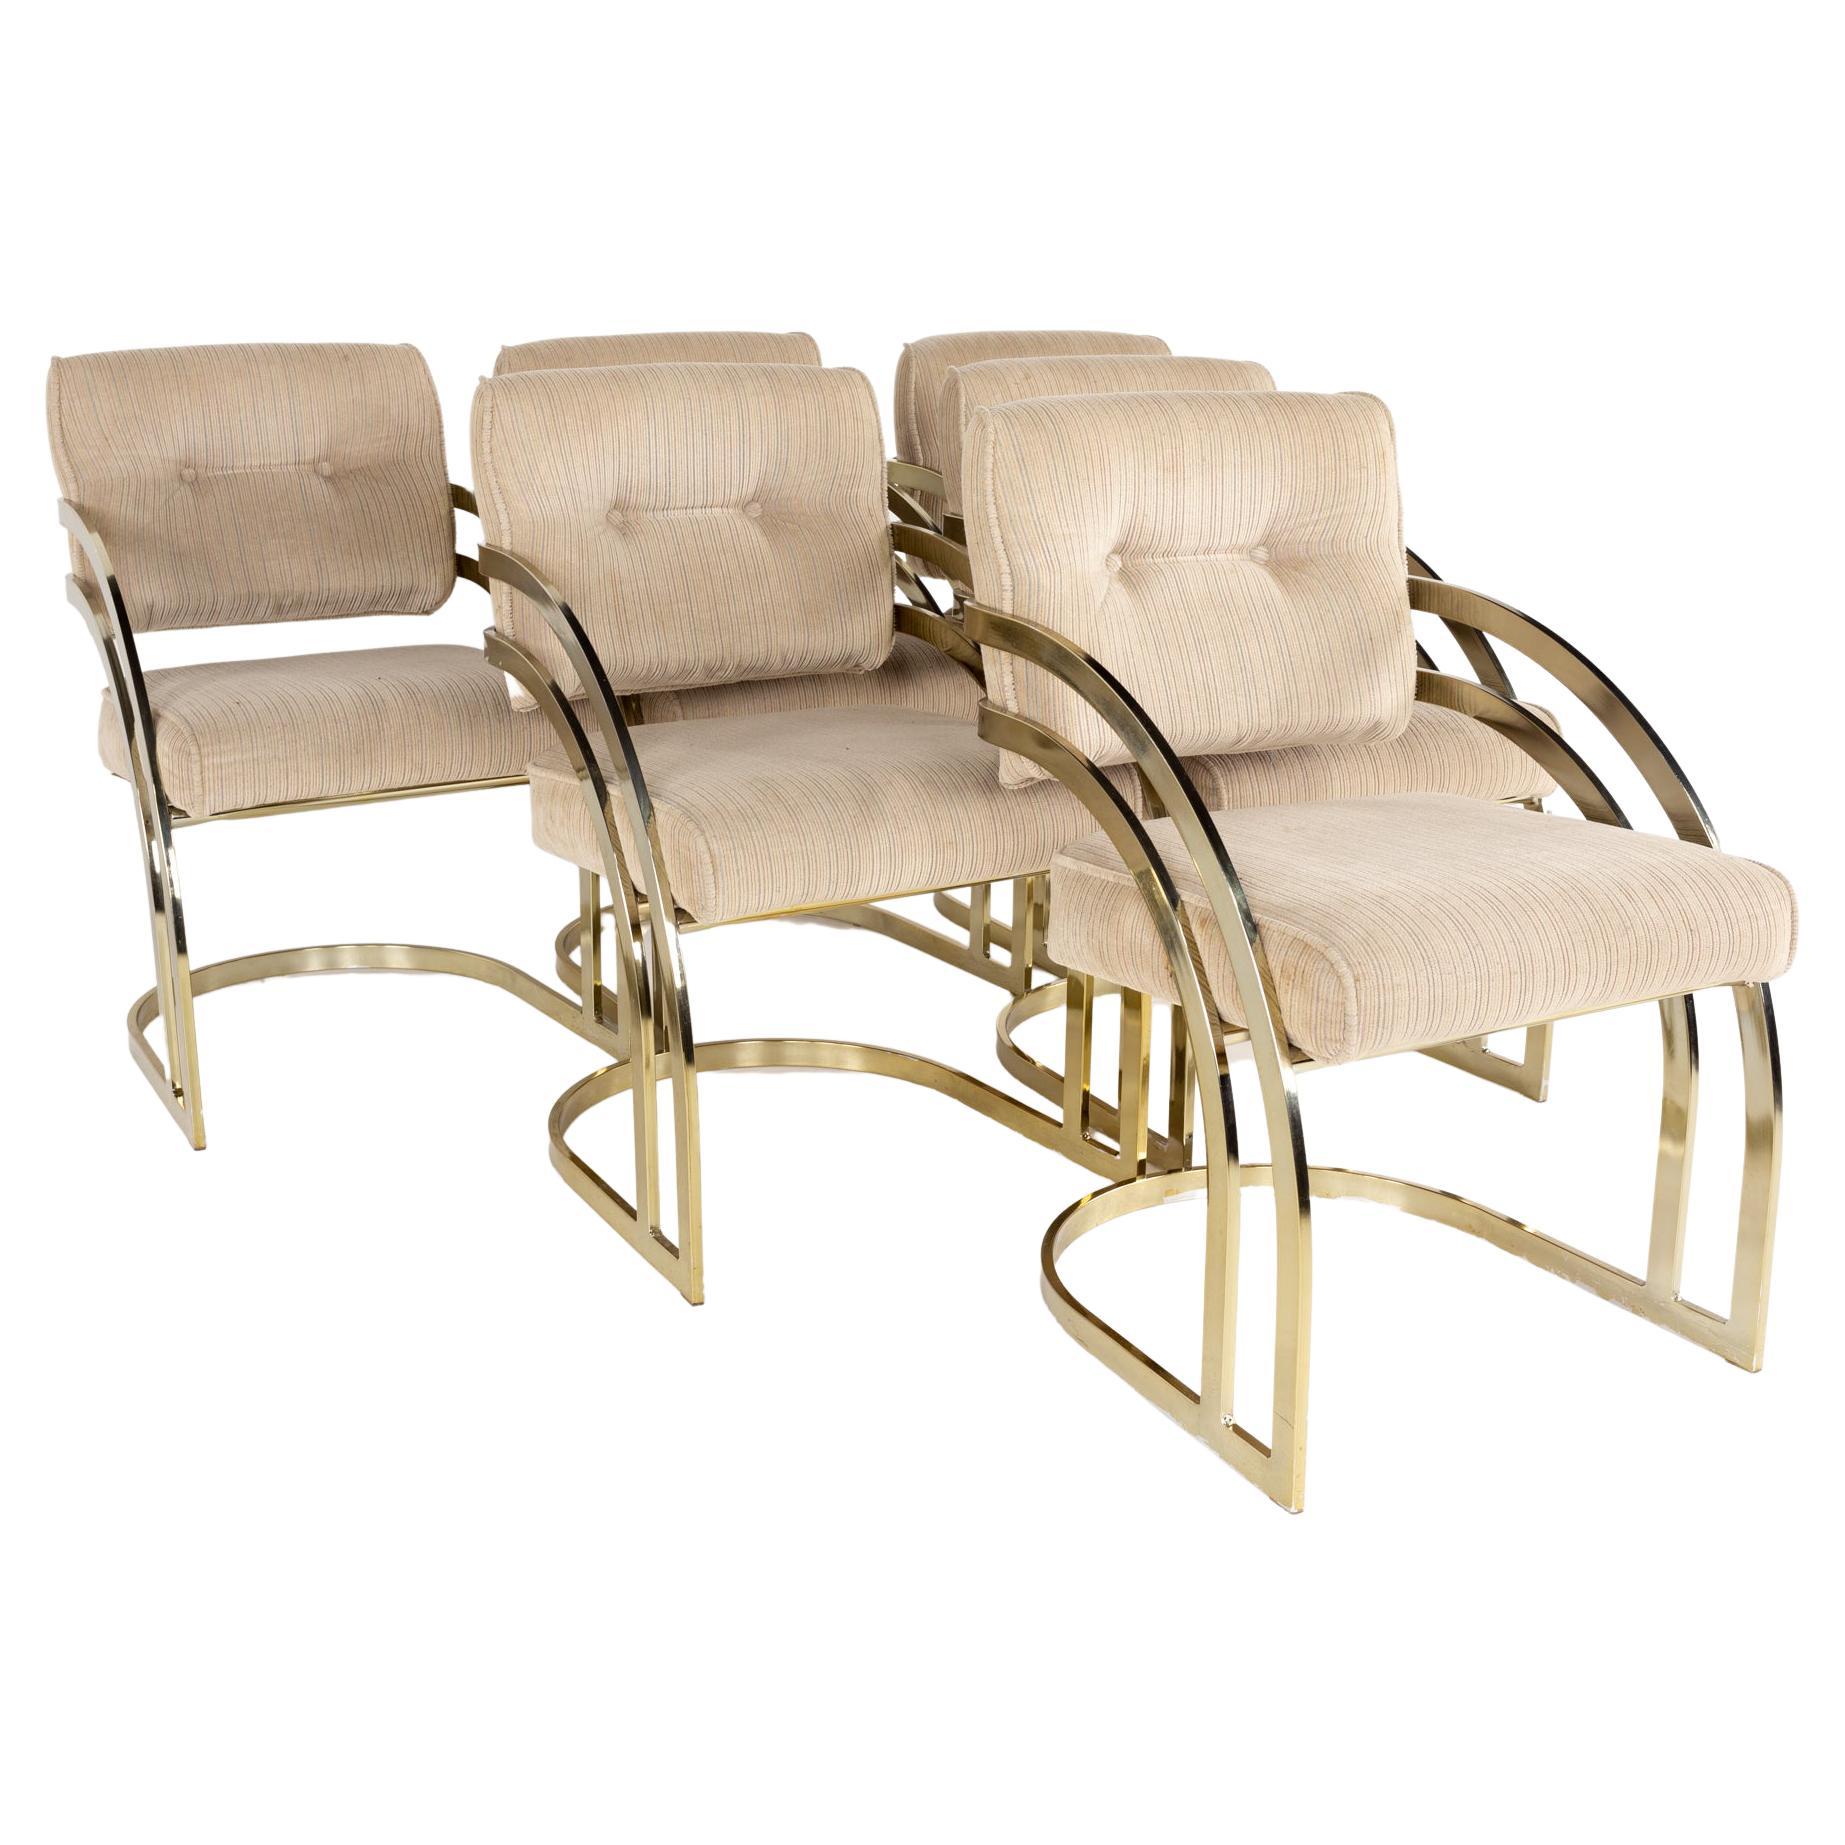 Milo Baughan Style Mid Century Brass Cantilever Dining Chairs, Set of 6